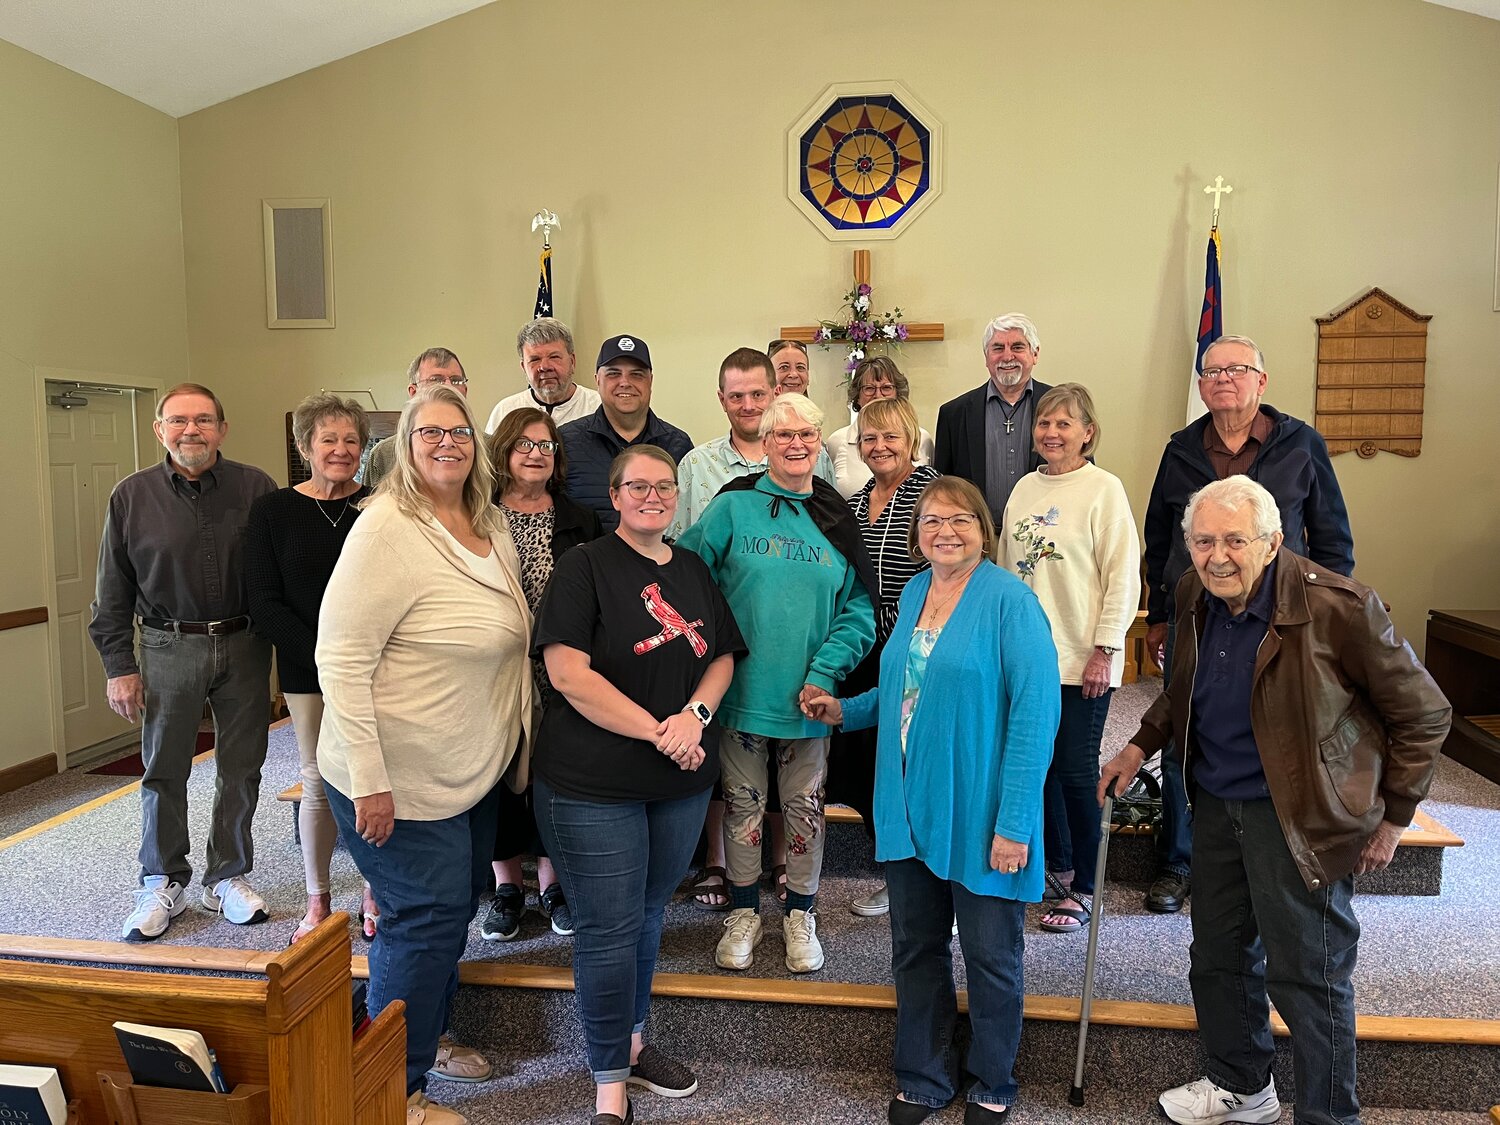 CELEBRATING A HERO - Several people from the community, including from organizations Linde Flanders volunteers with, helped honor this month’s Hidden Hero during the presentation at Harmonie Church on May 1.